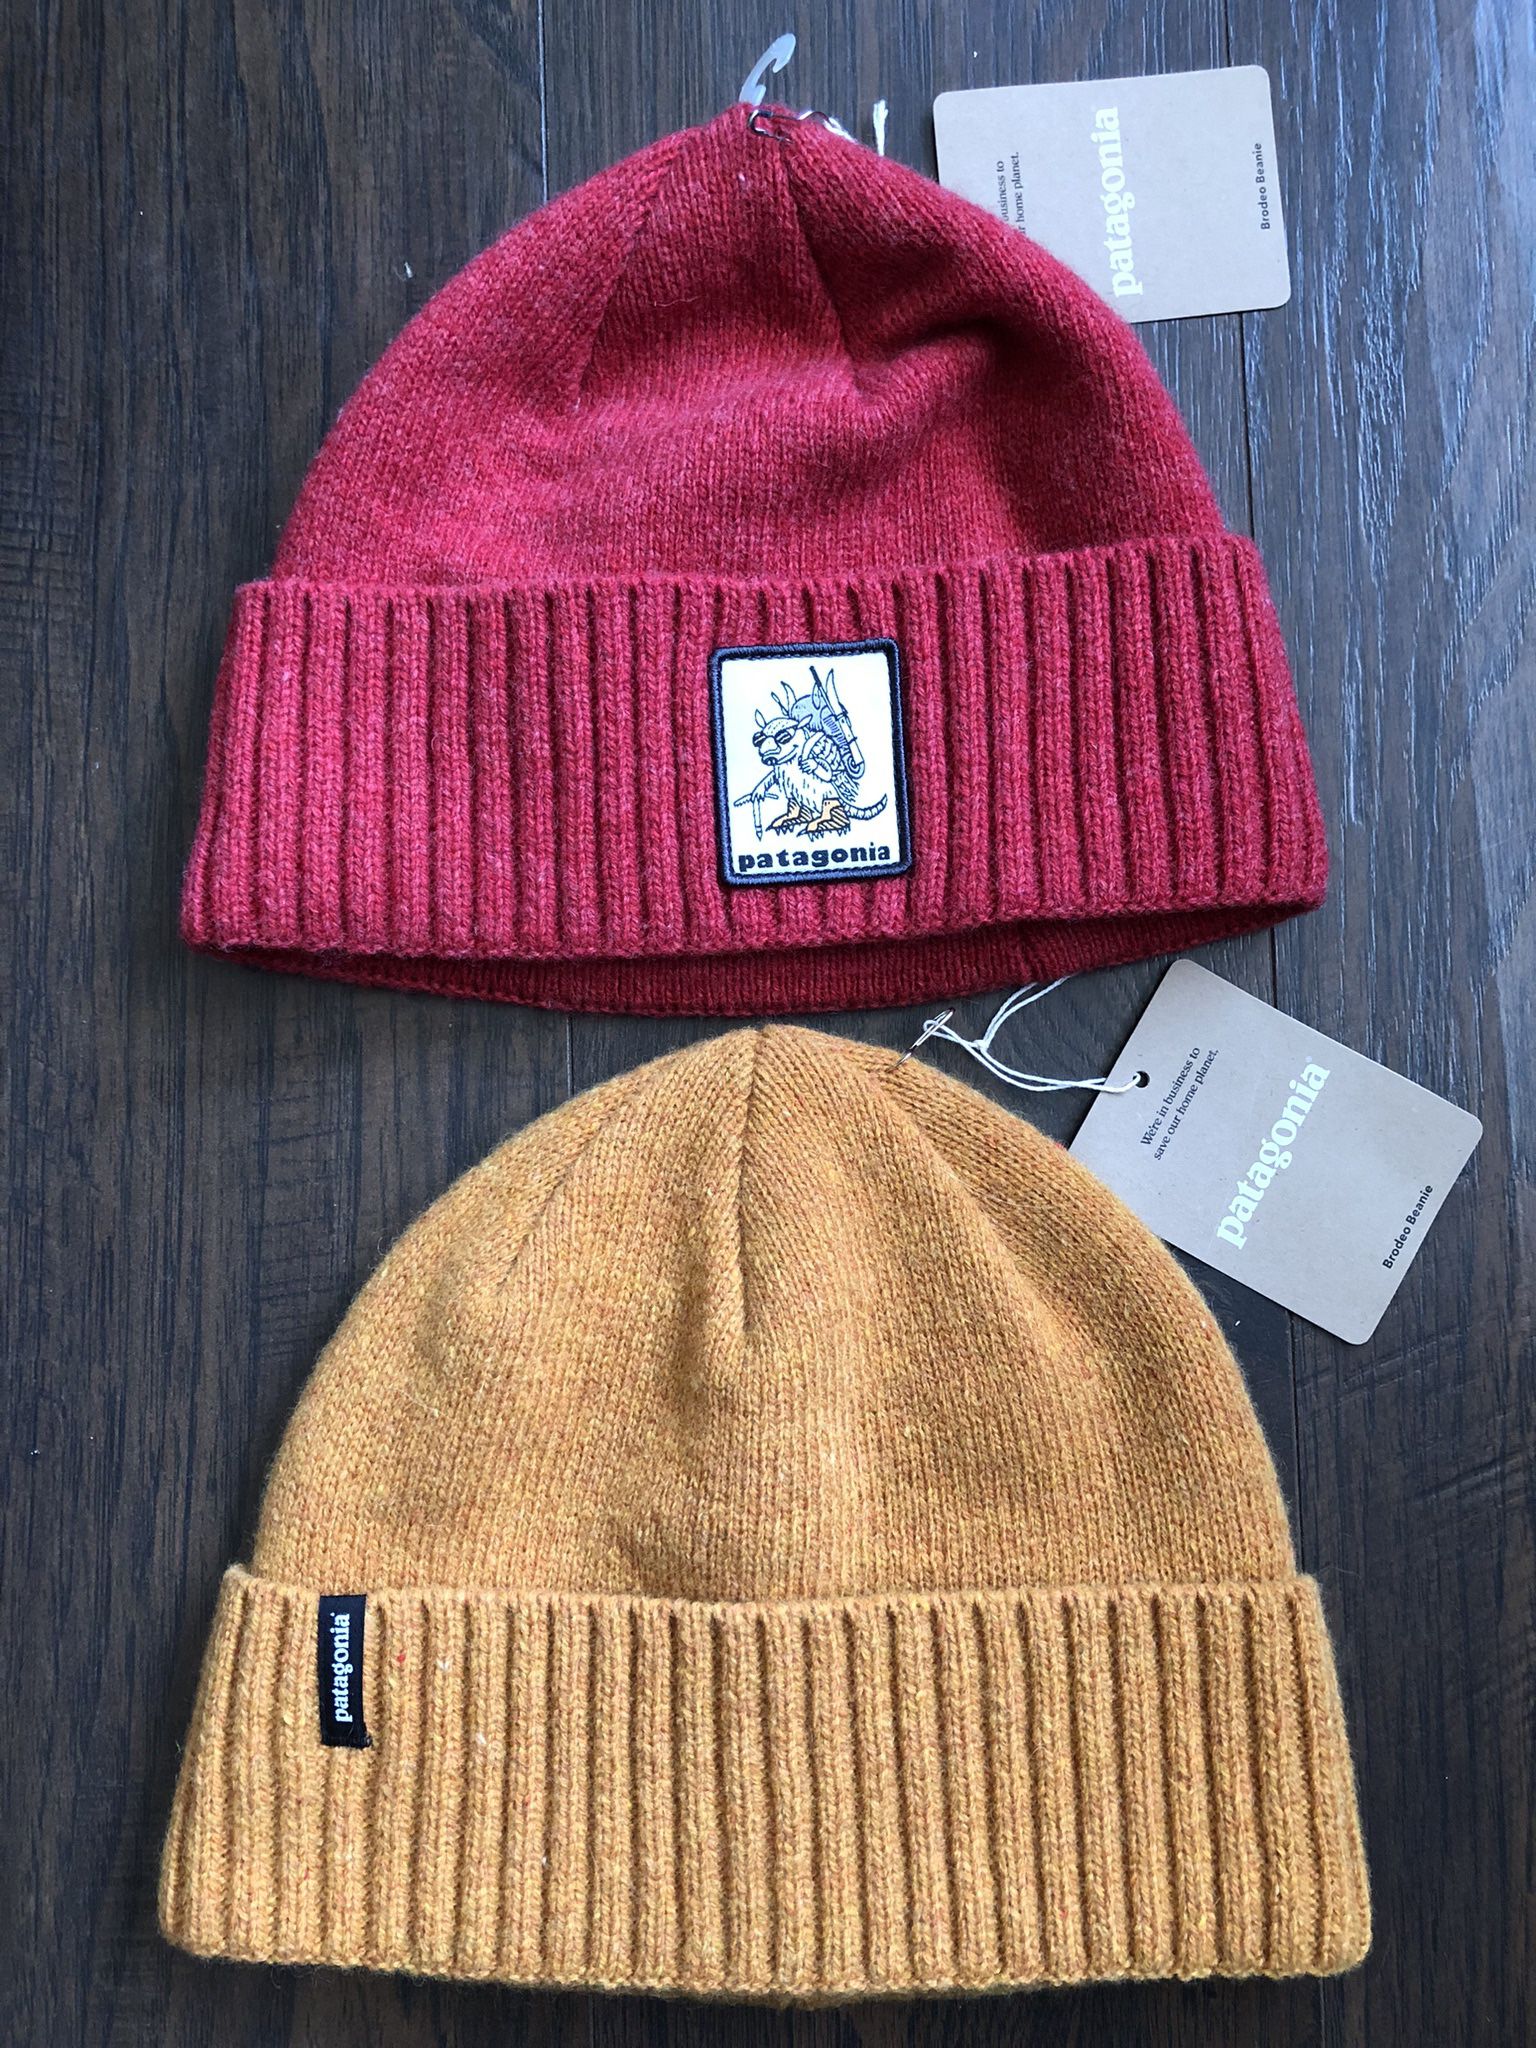 Patagonia Beanies New With Tags Beanie. Retail is $50 each. I can do $25 each or take both for $40